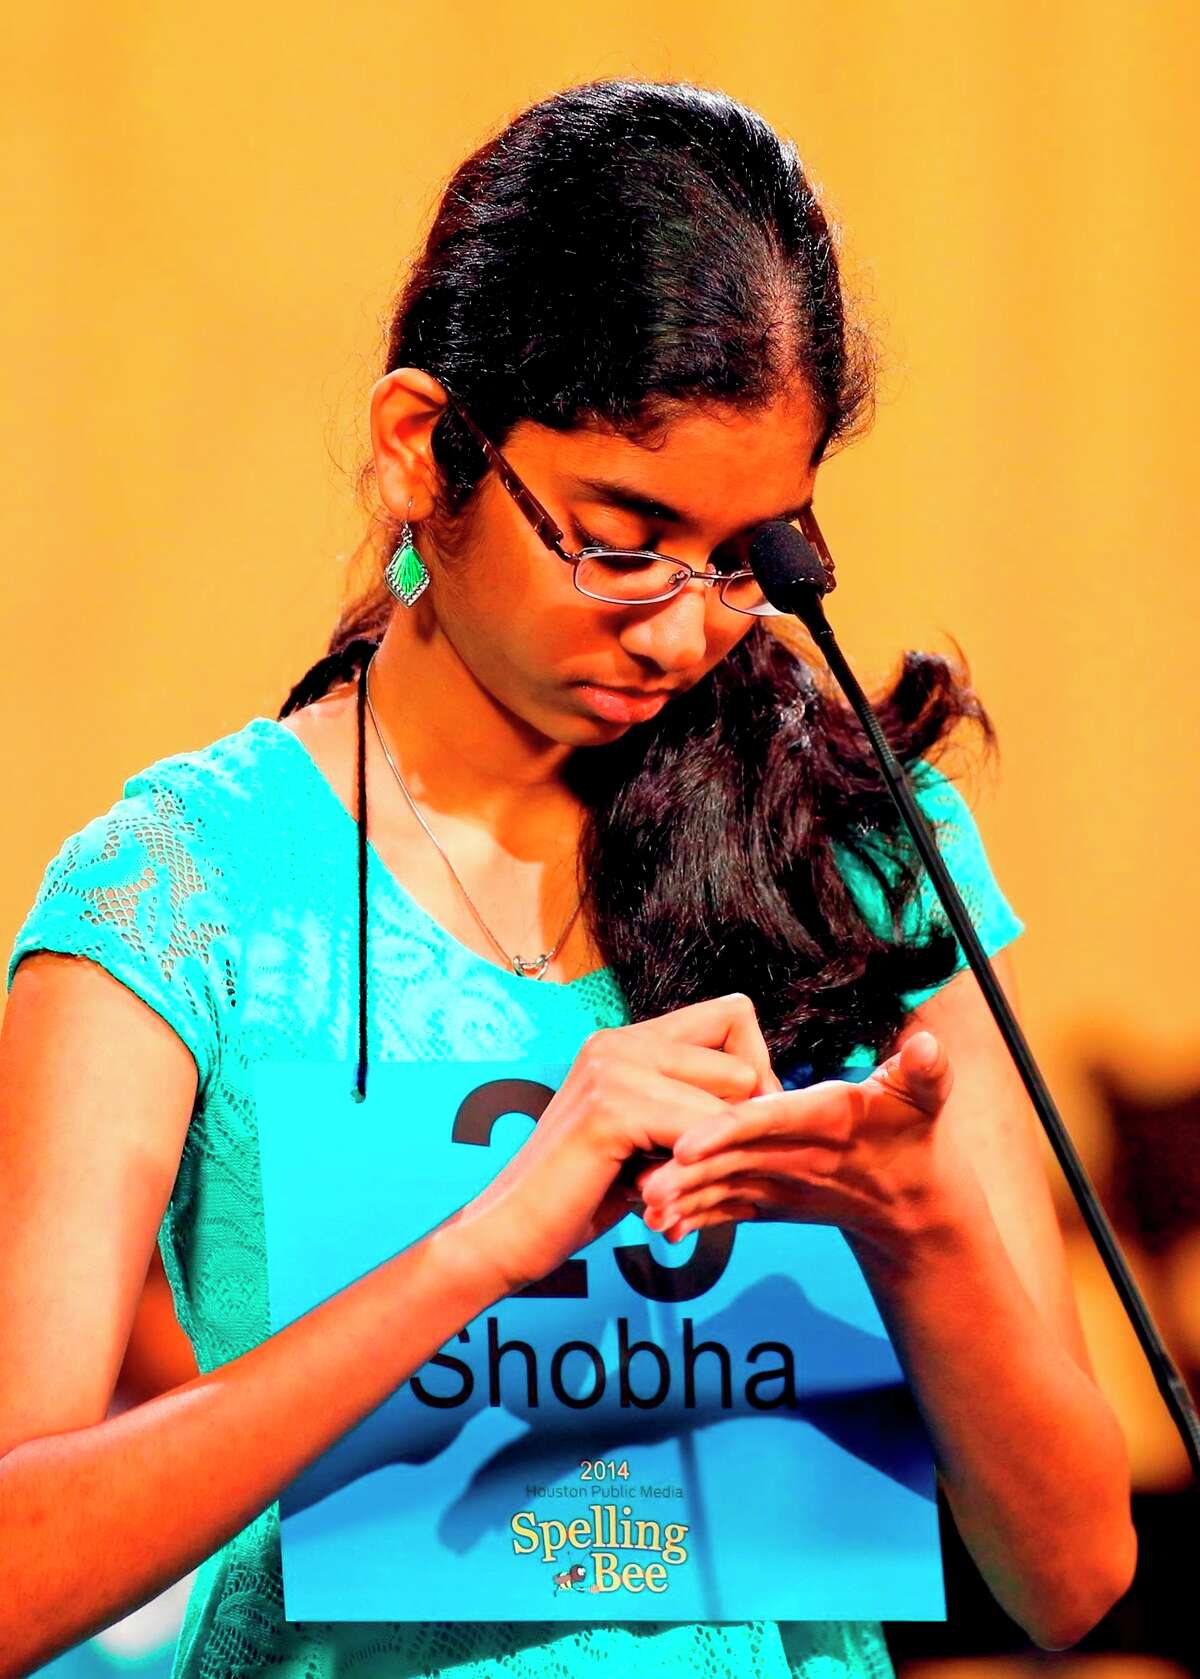 Pearland Junior High West's Shobha Dasari writes a word on her palm before spelling it aloud in the Houston PBS Spelling Bee March 29, where she placed as co-champion Pearland Junior High West's Shobha Dasari writes a word on her palm before spelling it aloud in the Houston PBS Spelling Bee March 29, where she placed as co-champion